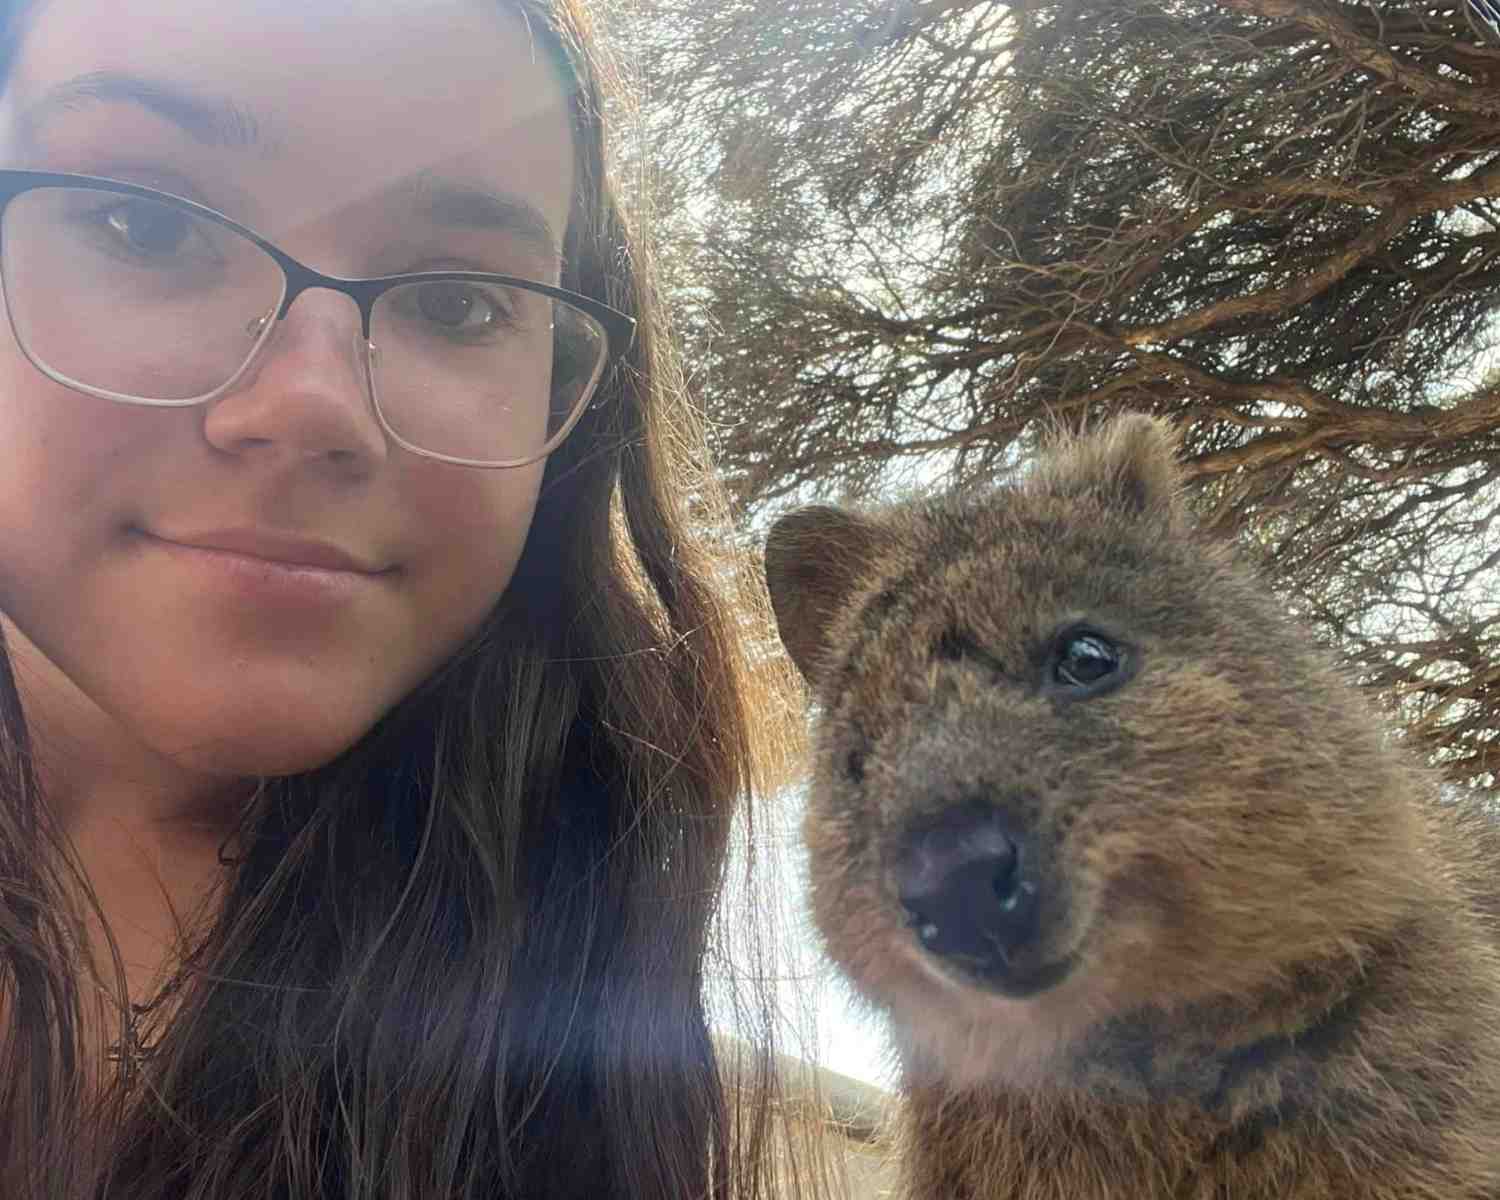 Where to find quokkas on Rottnest Island